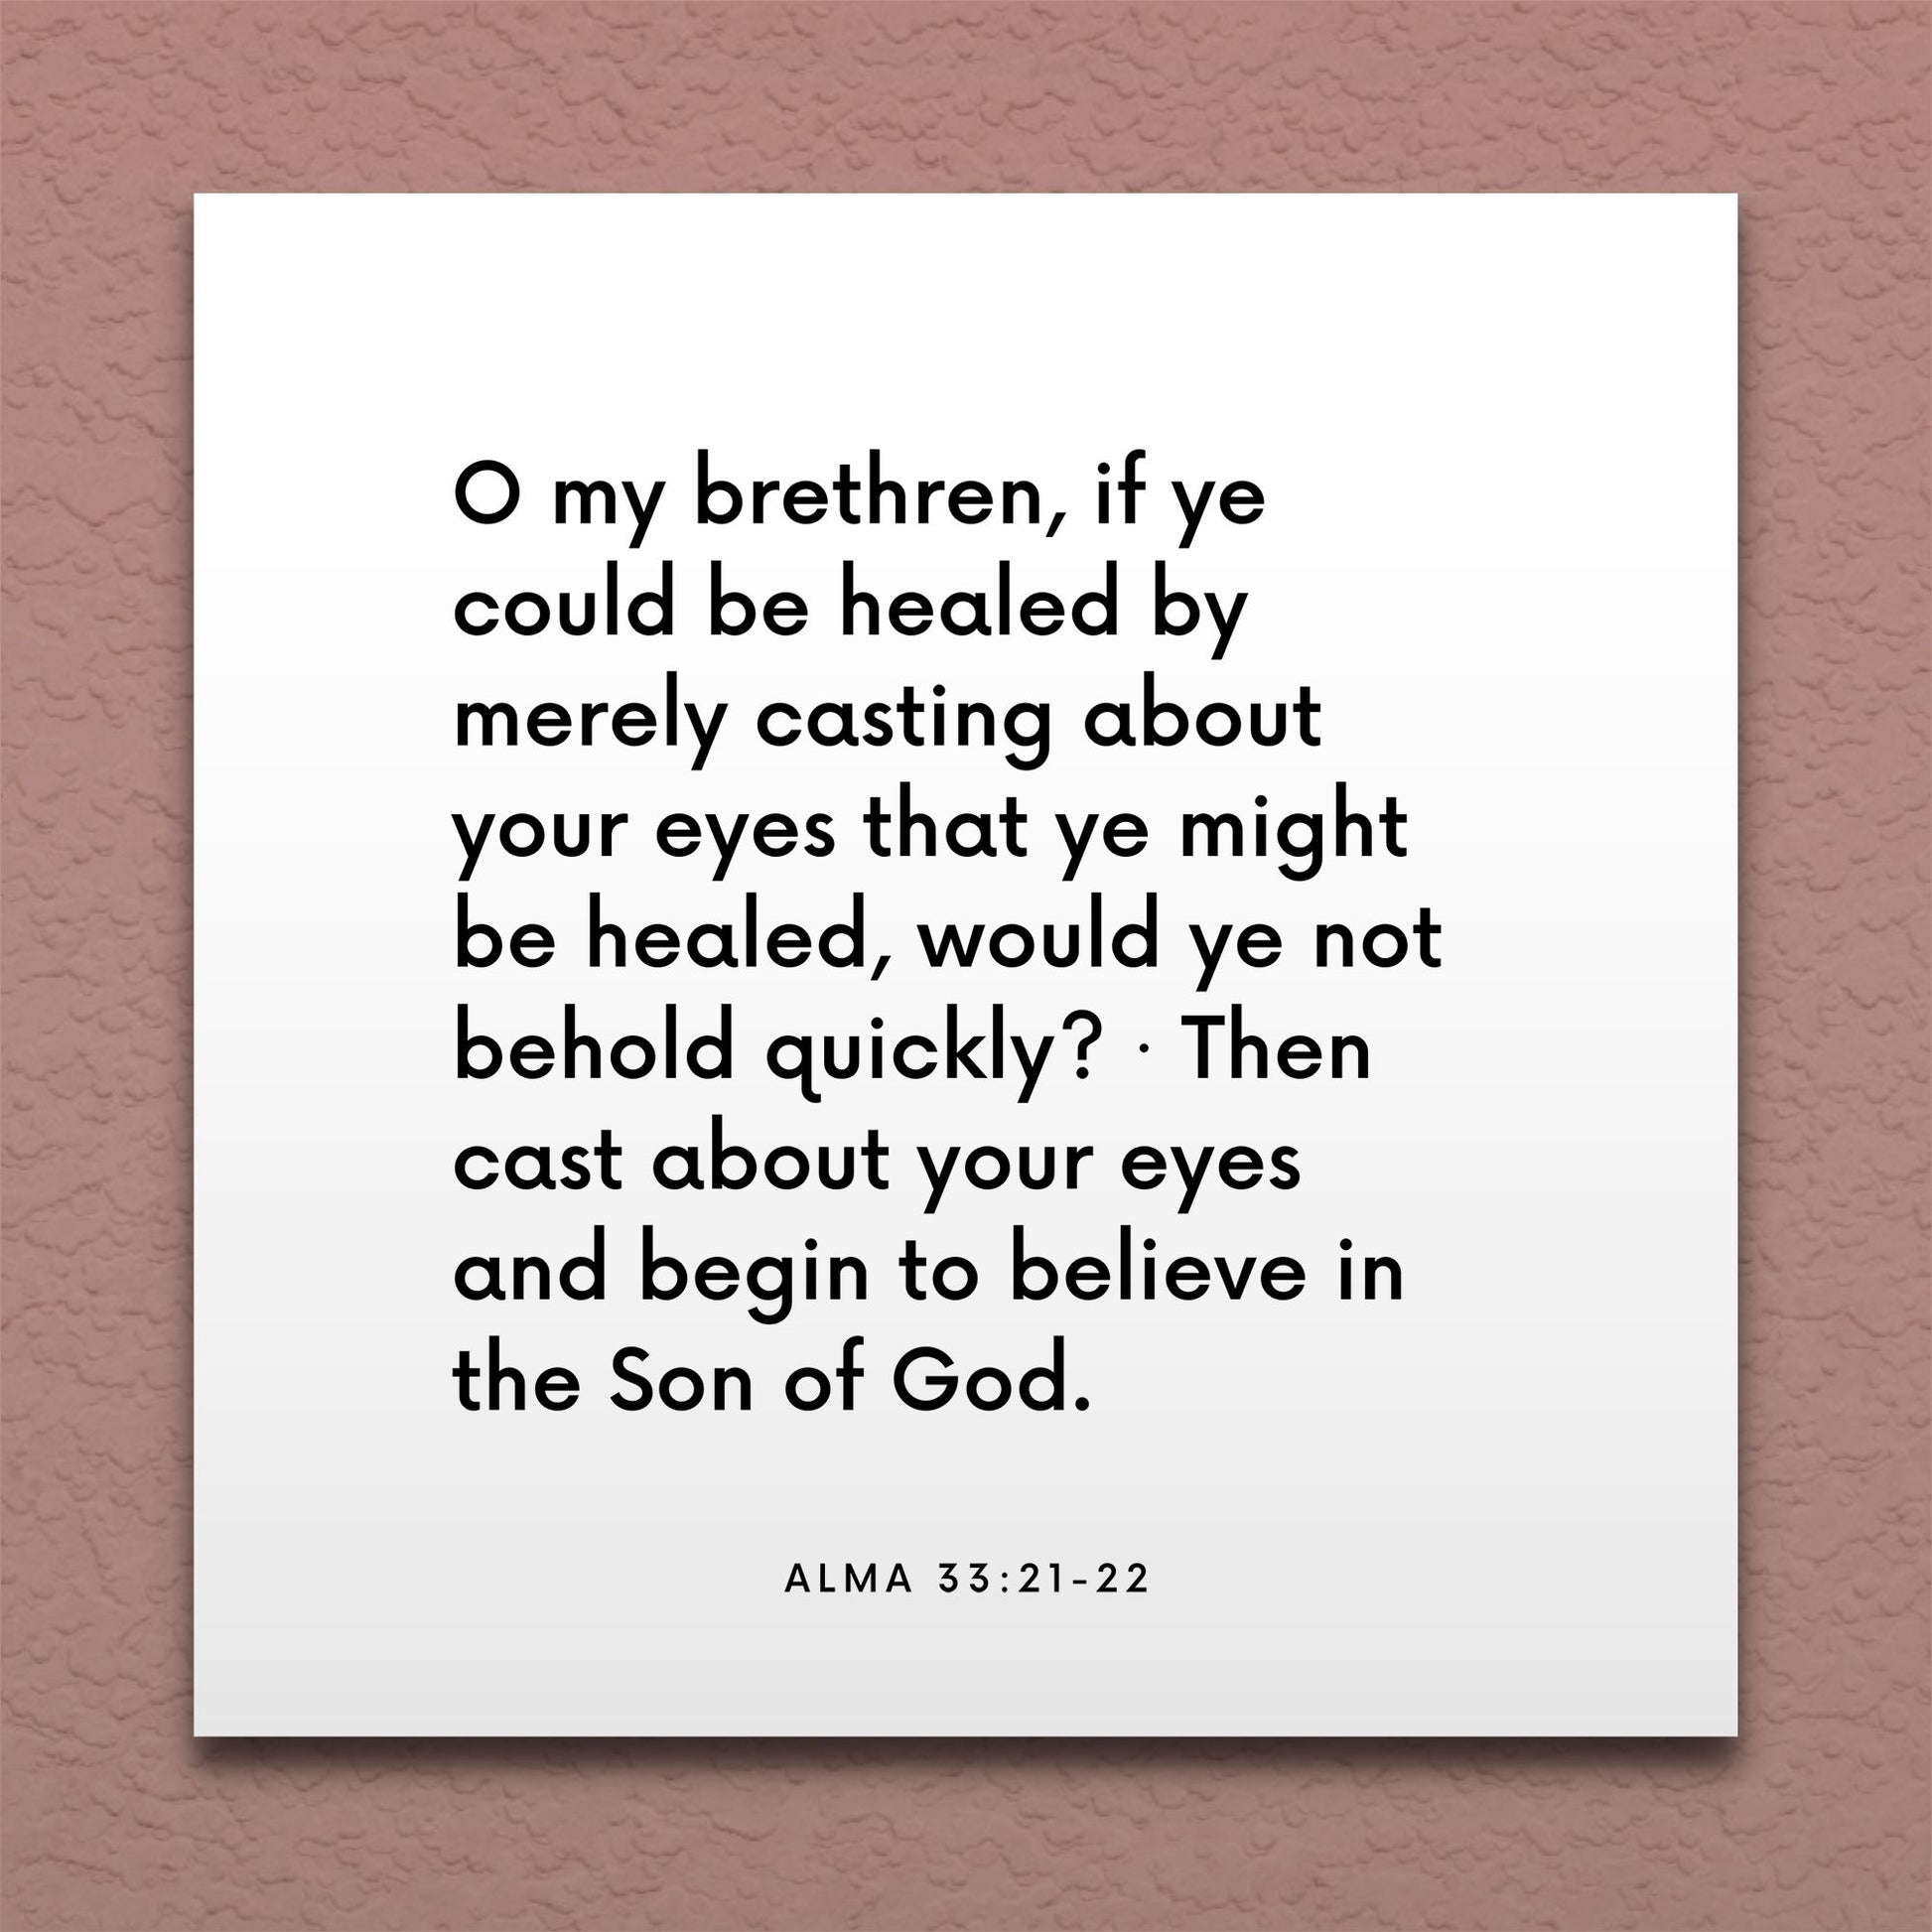 Wall-mounted scripture tile for Alma 33:21-22 - "If ye could be healed by merely casting about your eyes"